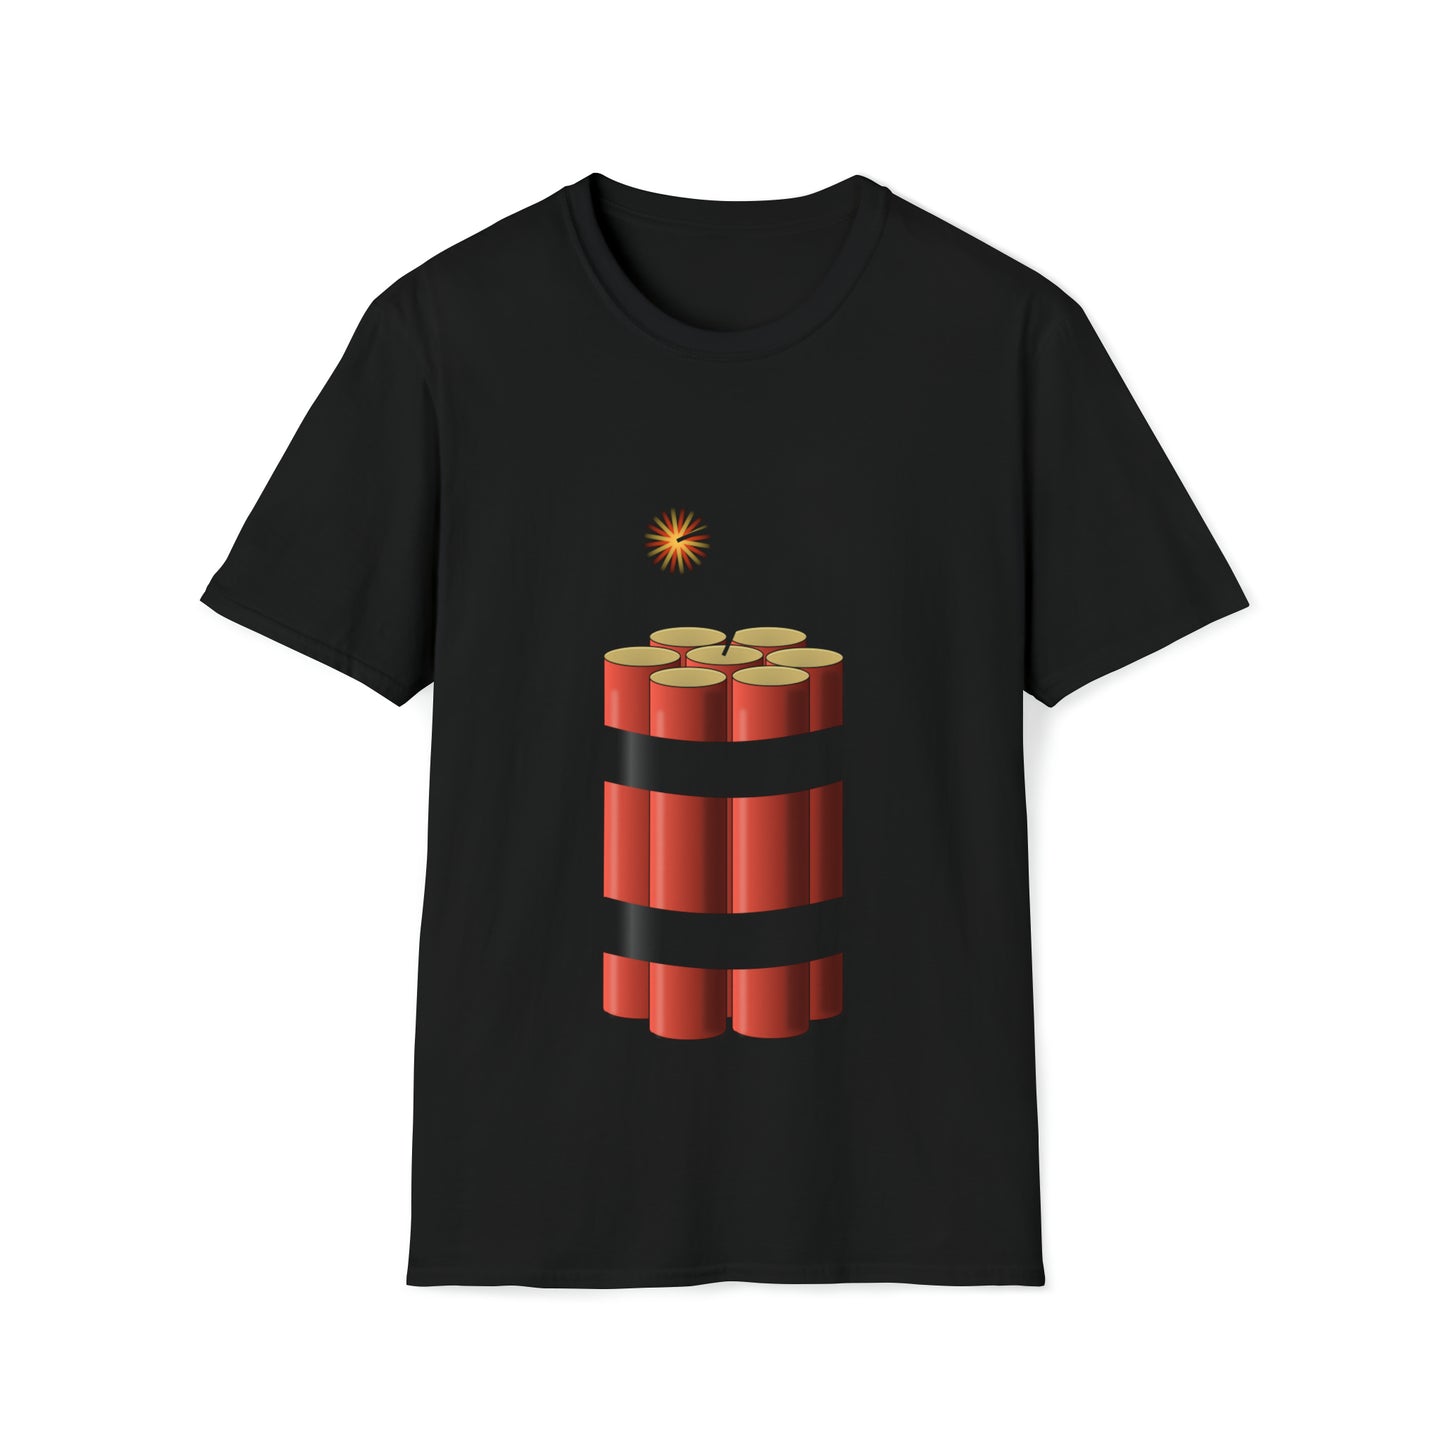 This is dynamite T-Shirt